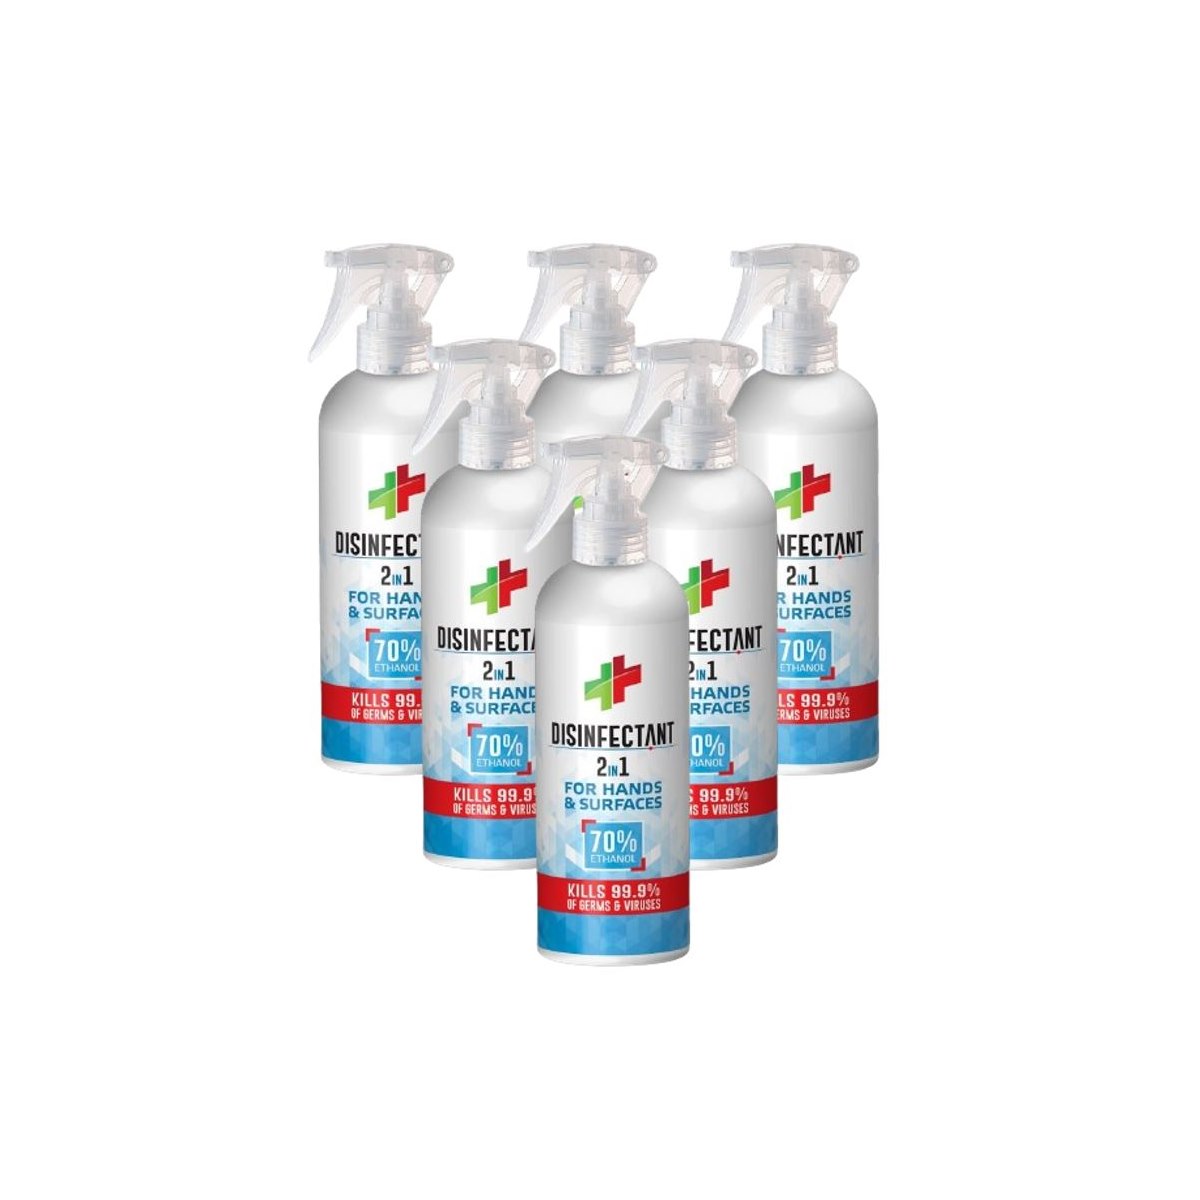 Case of 6 x Tri-Bio 2 in 1 Disinfectant for Hands and Hard Surfaces 200ml